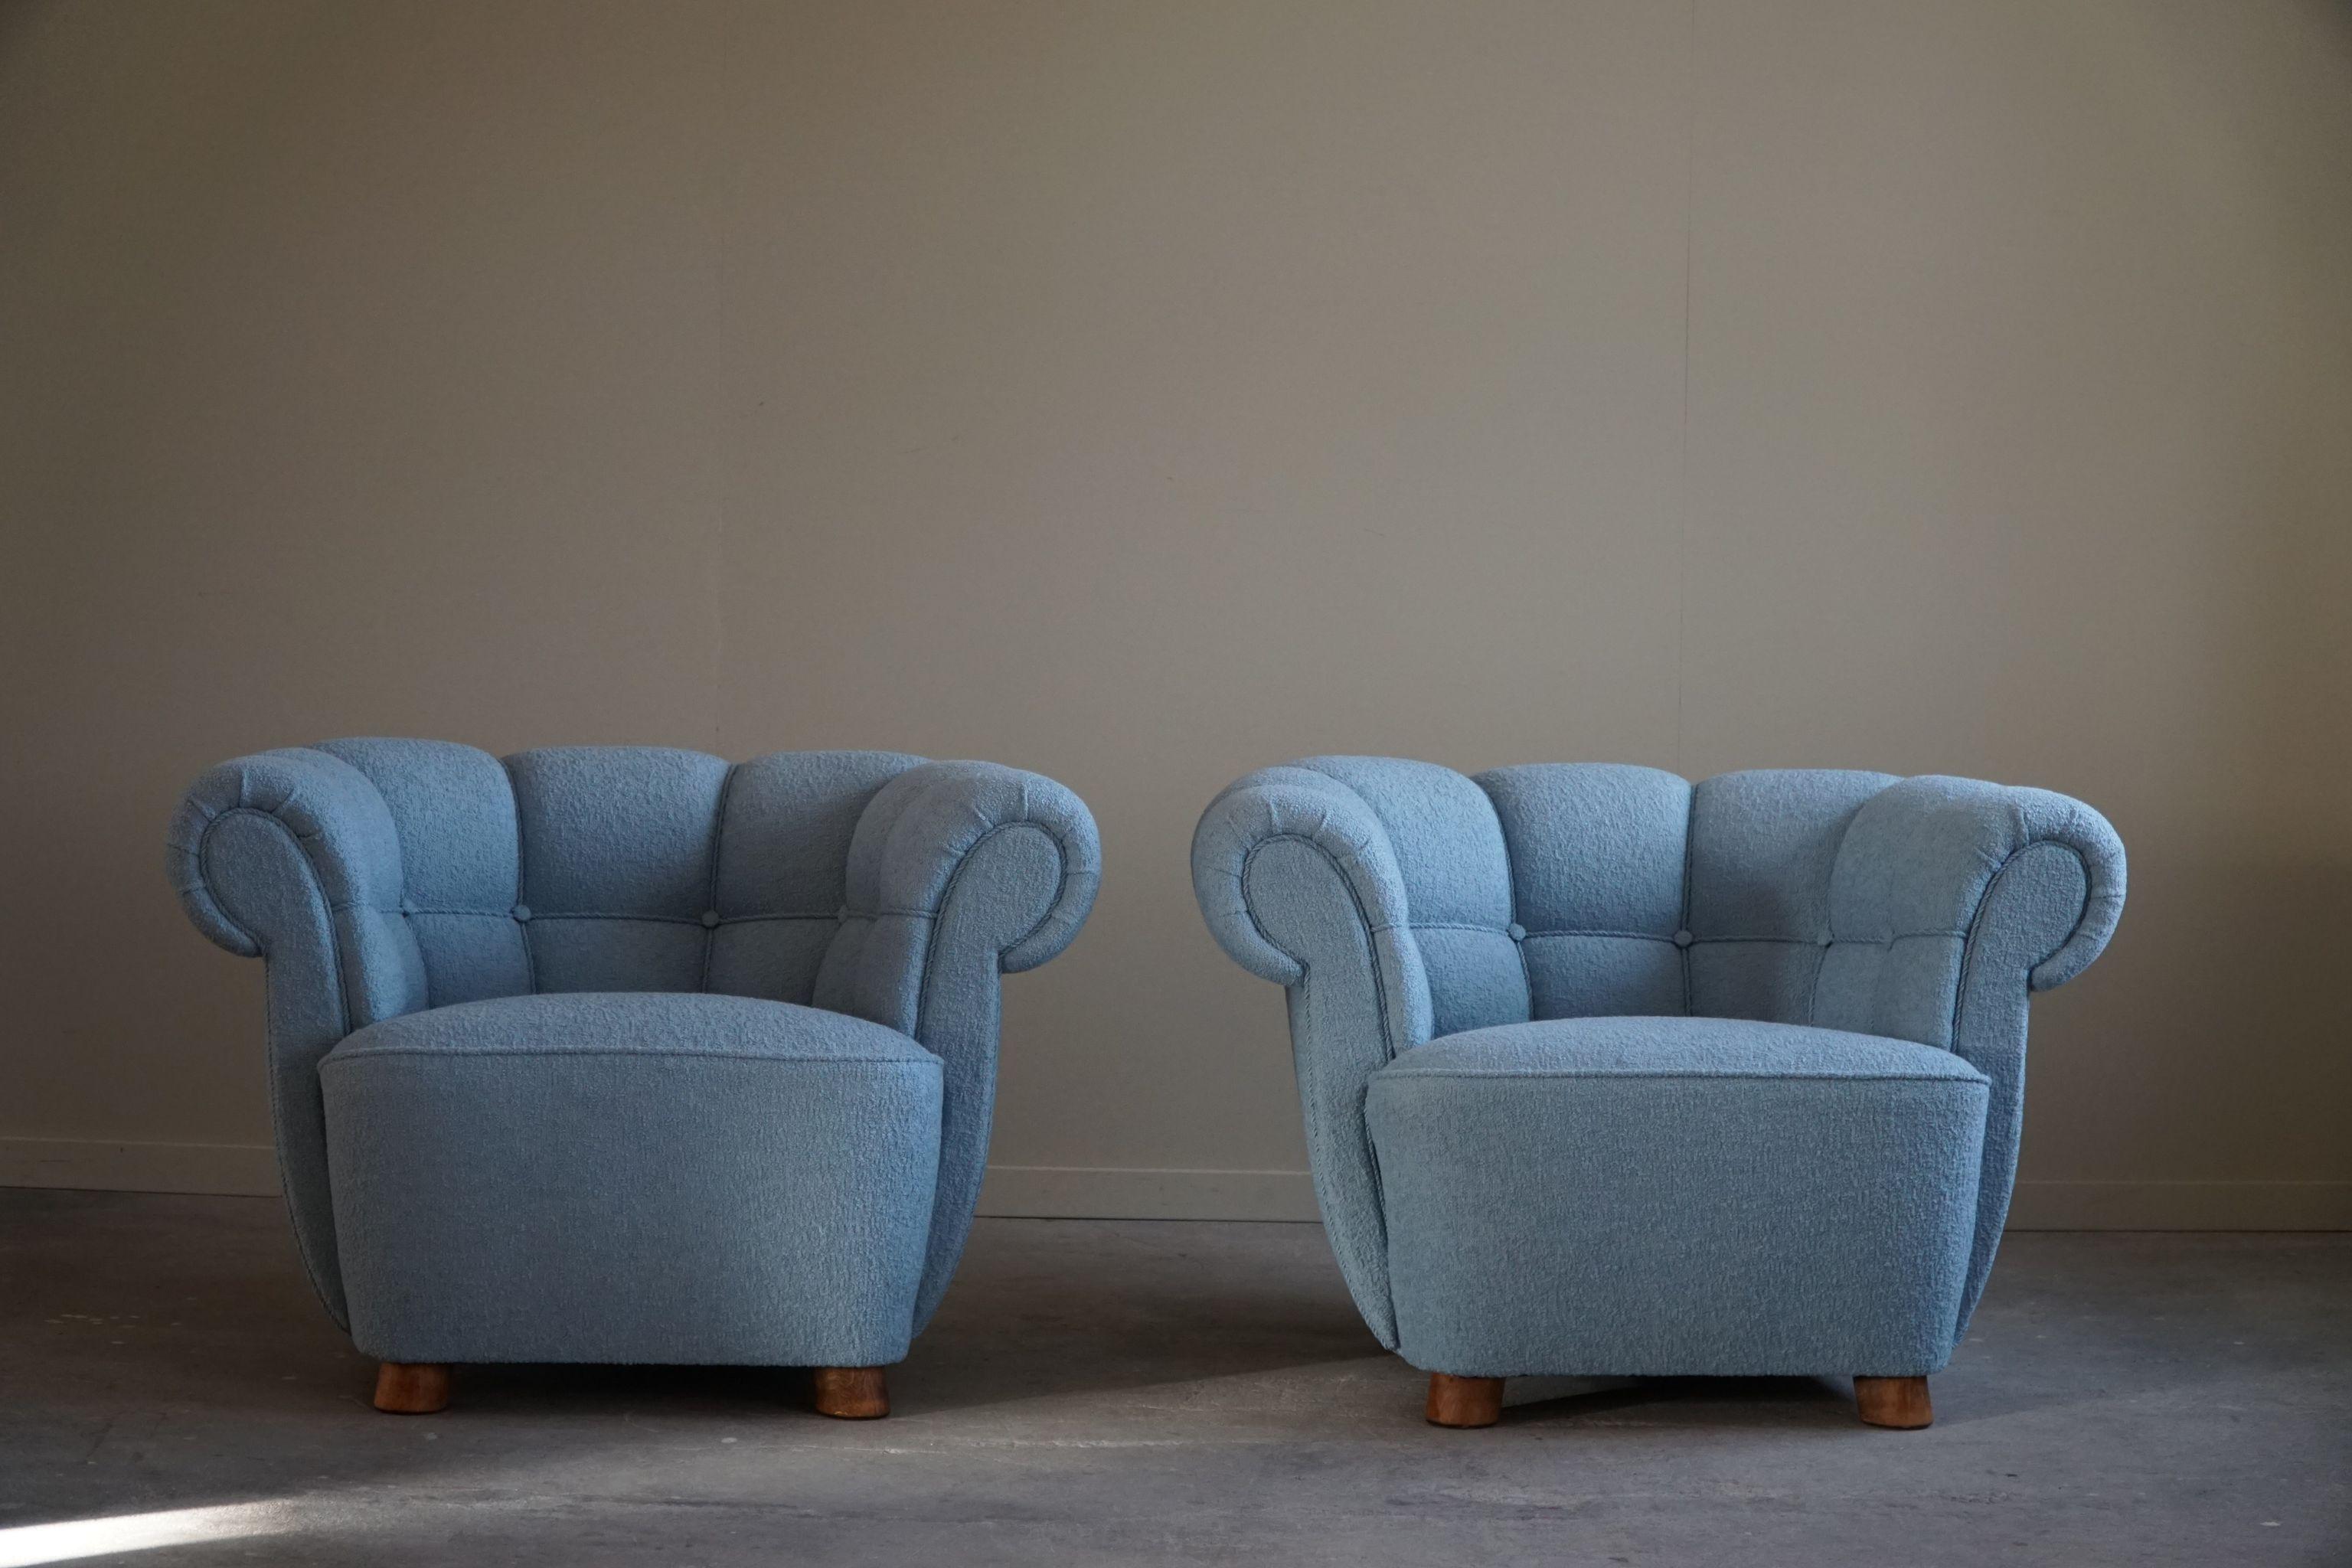 Fabric 1930s Pair of Lounge Chairs, Reupholstered in Bouclé, Art Deco, Danish Modern For Sale